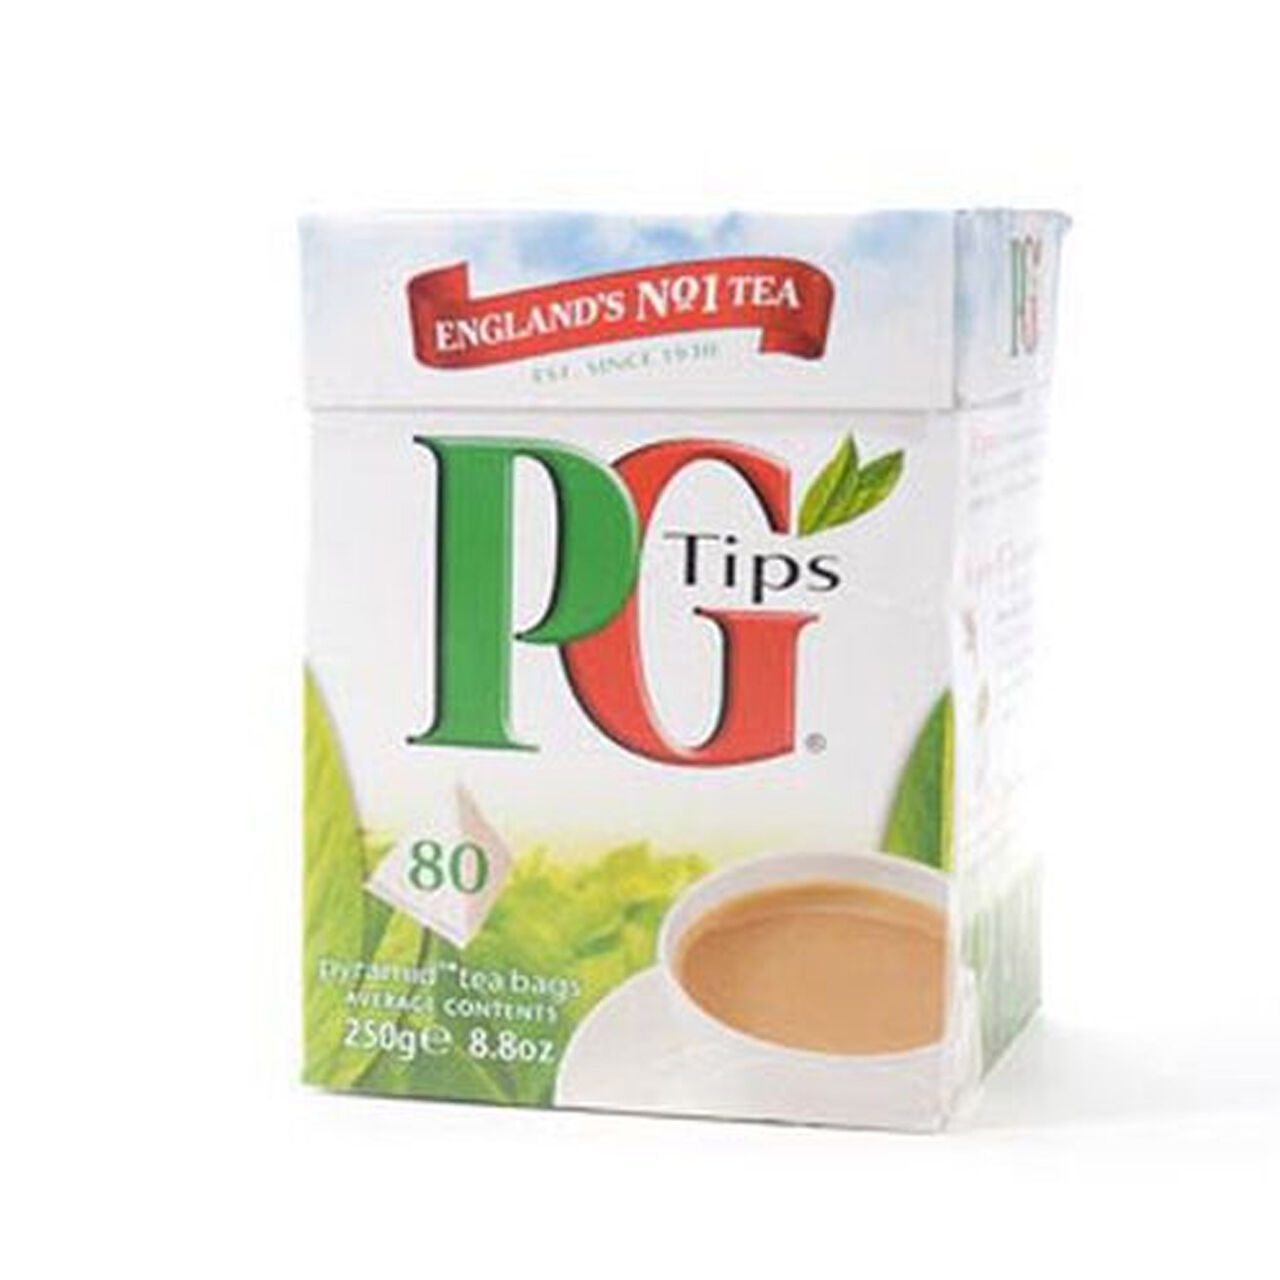 PG Tips Pyramid Tea Bags 80ct, , large image number 0